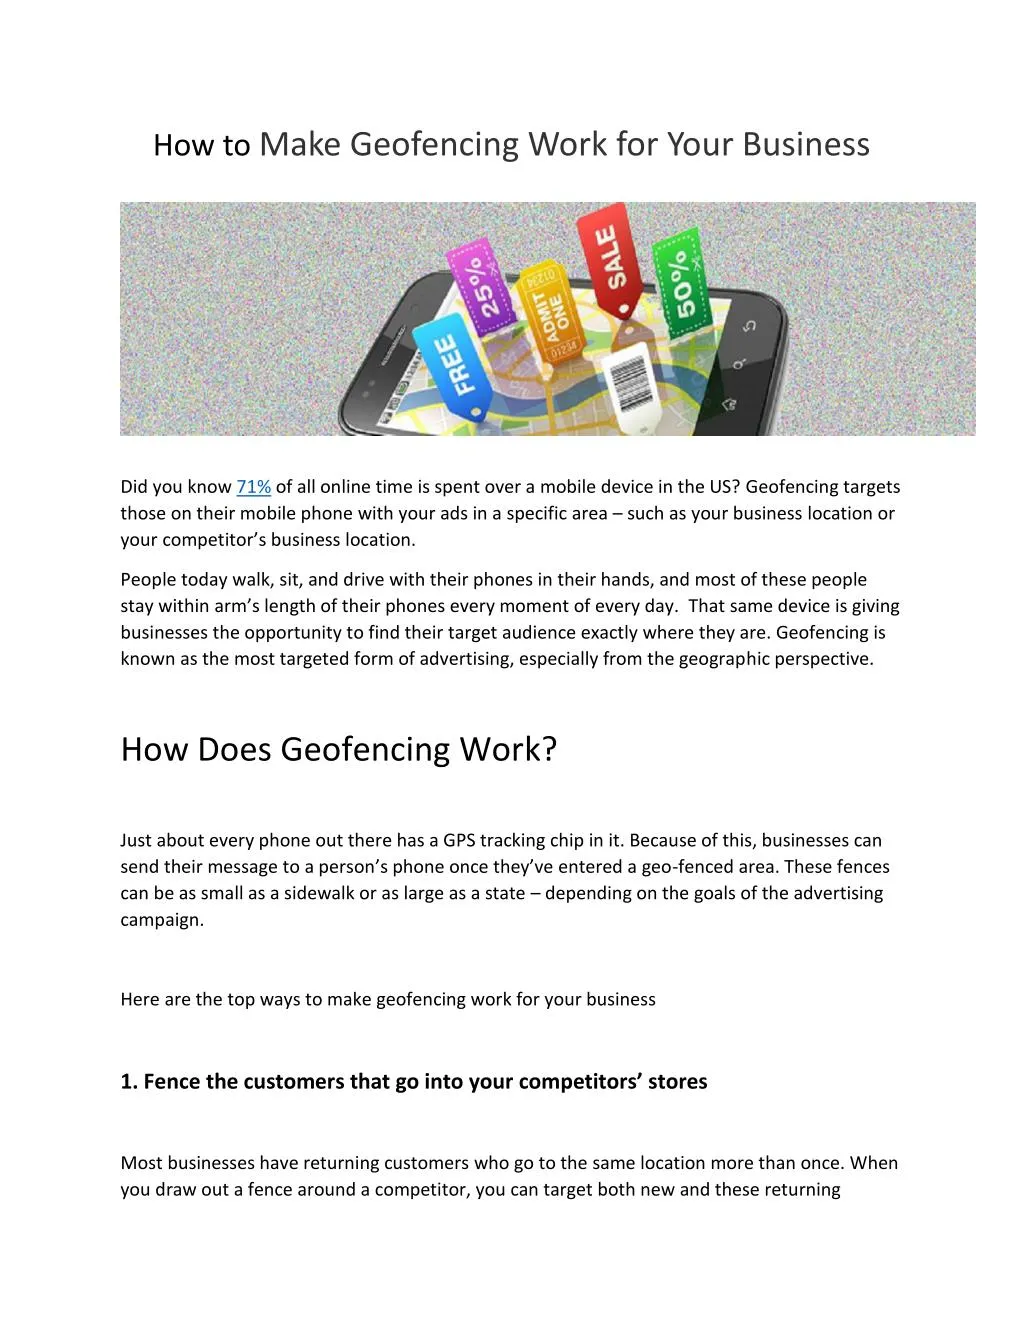 how to make geofencing work for your business